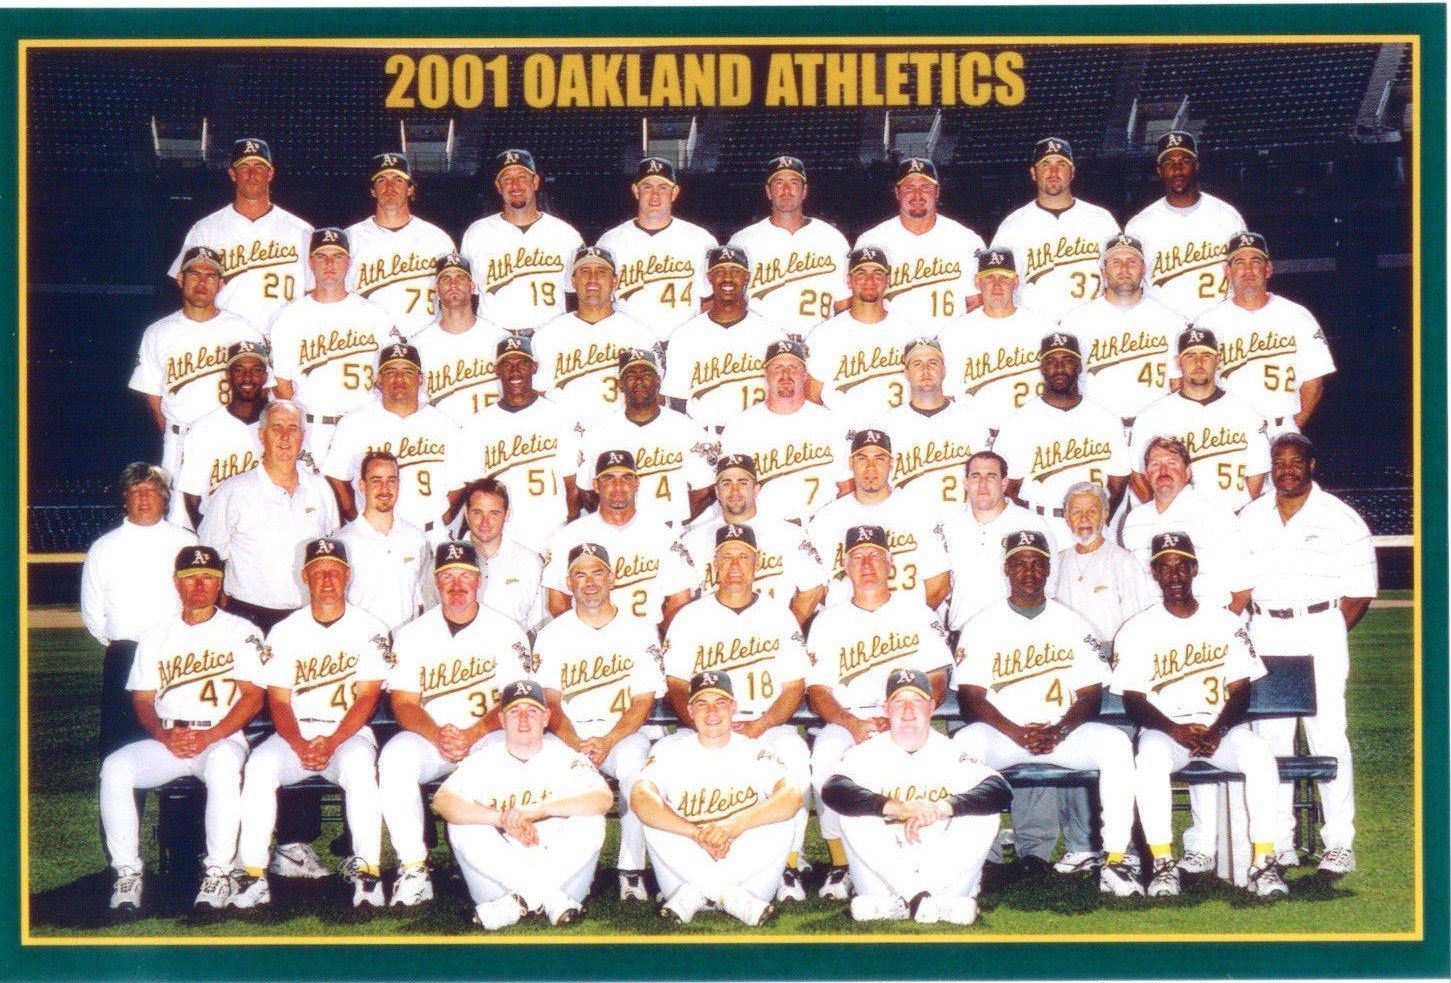 Primary image for 2001 OAKLAND ATHLETICS A's 8X10 TEAM PHOTO MLB BASEBALL PICTURE